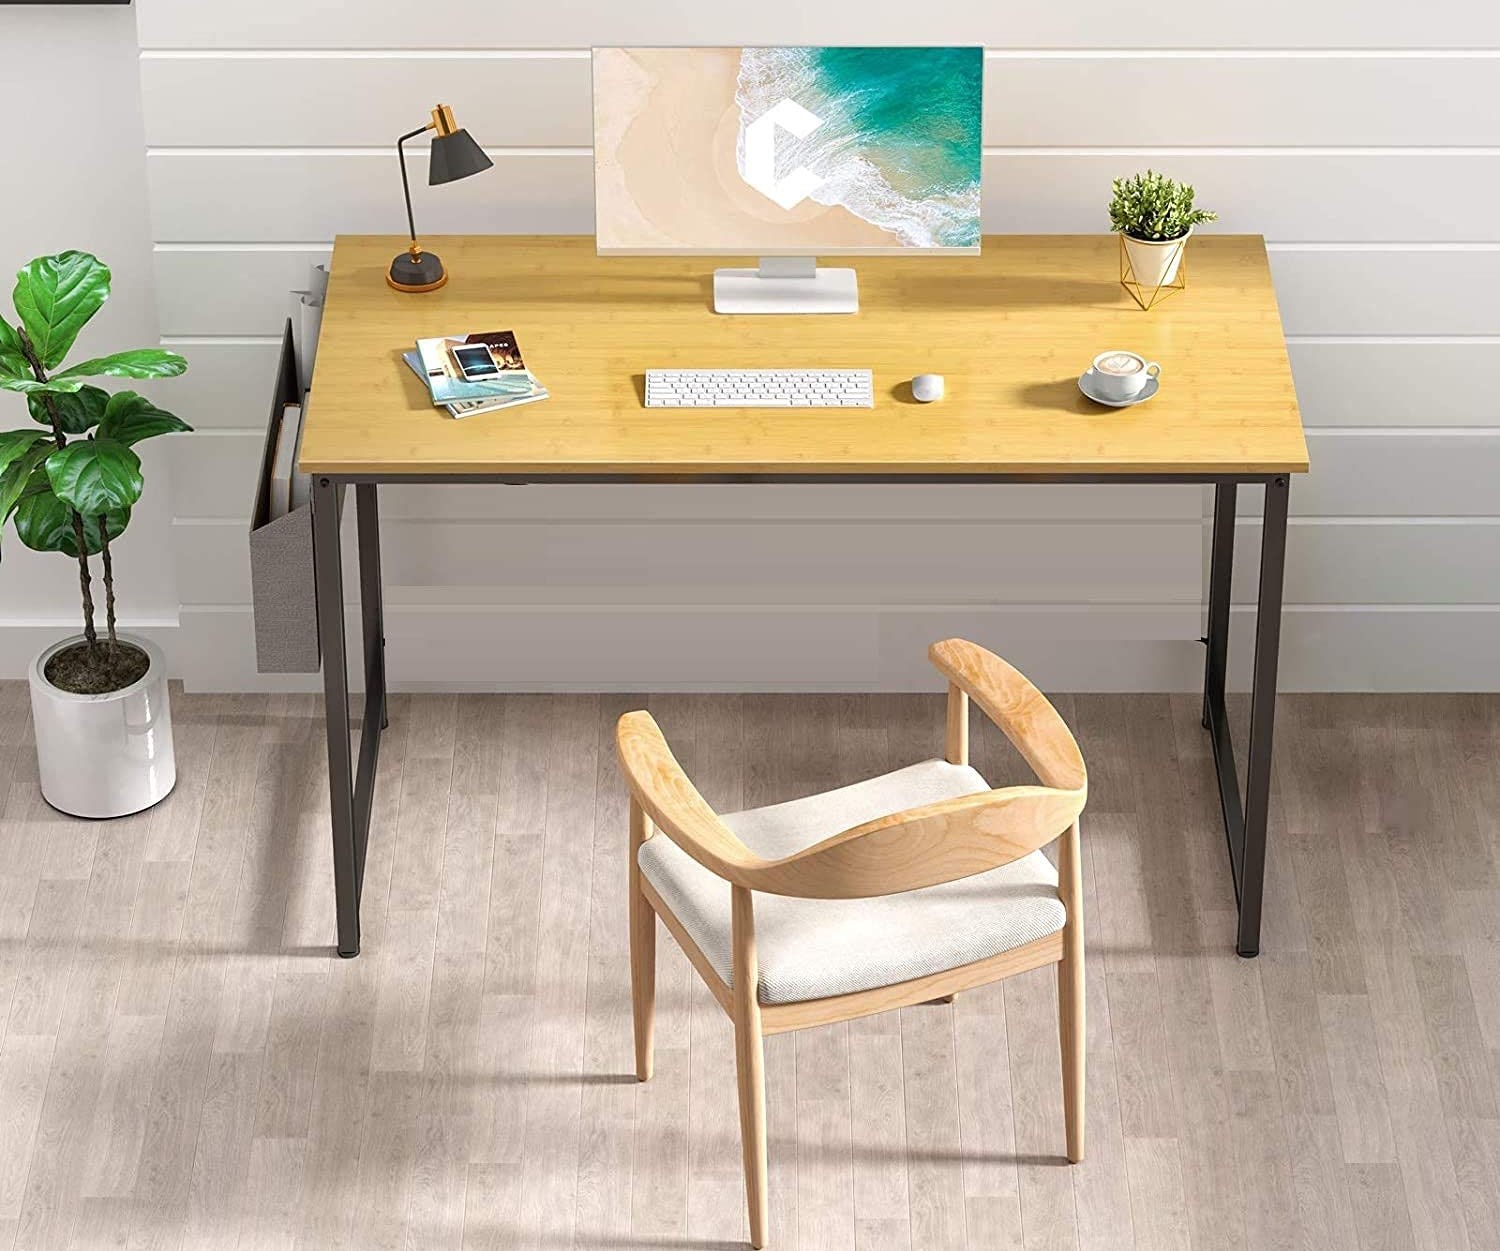 Why A Table Style Desk Is Better